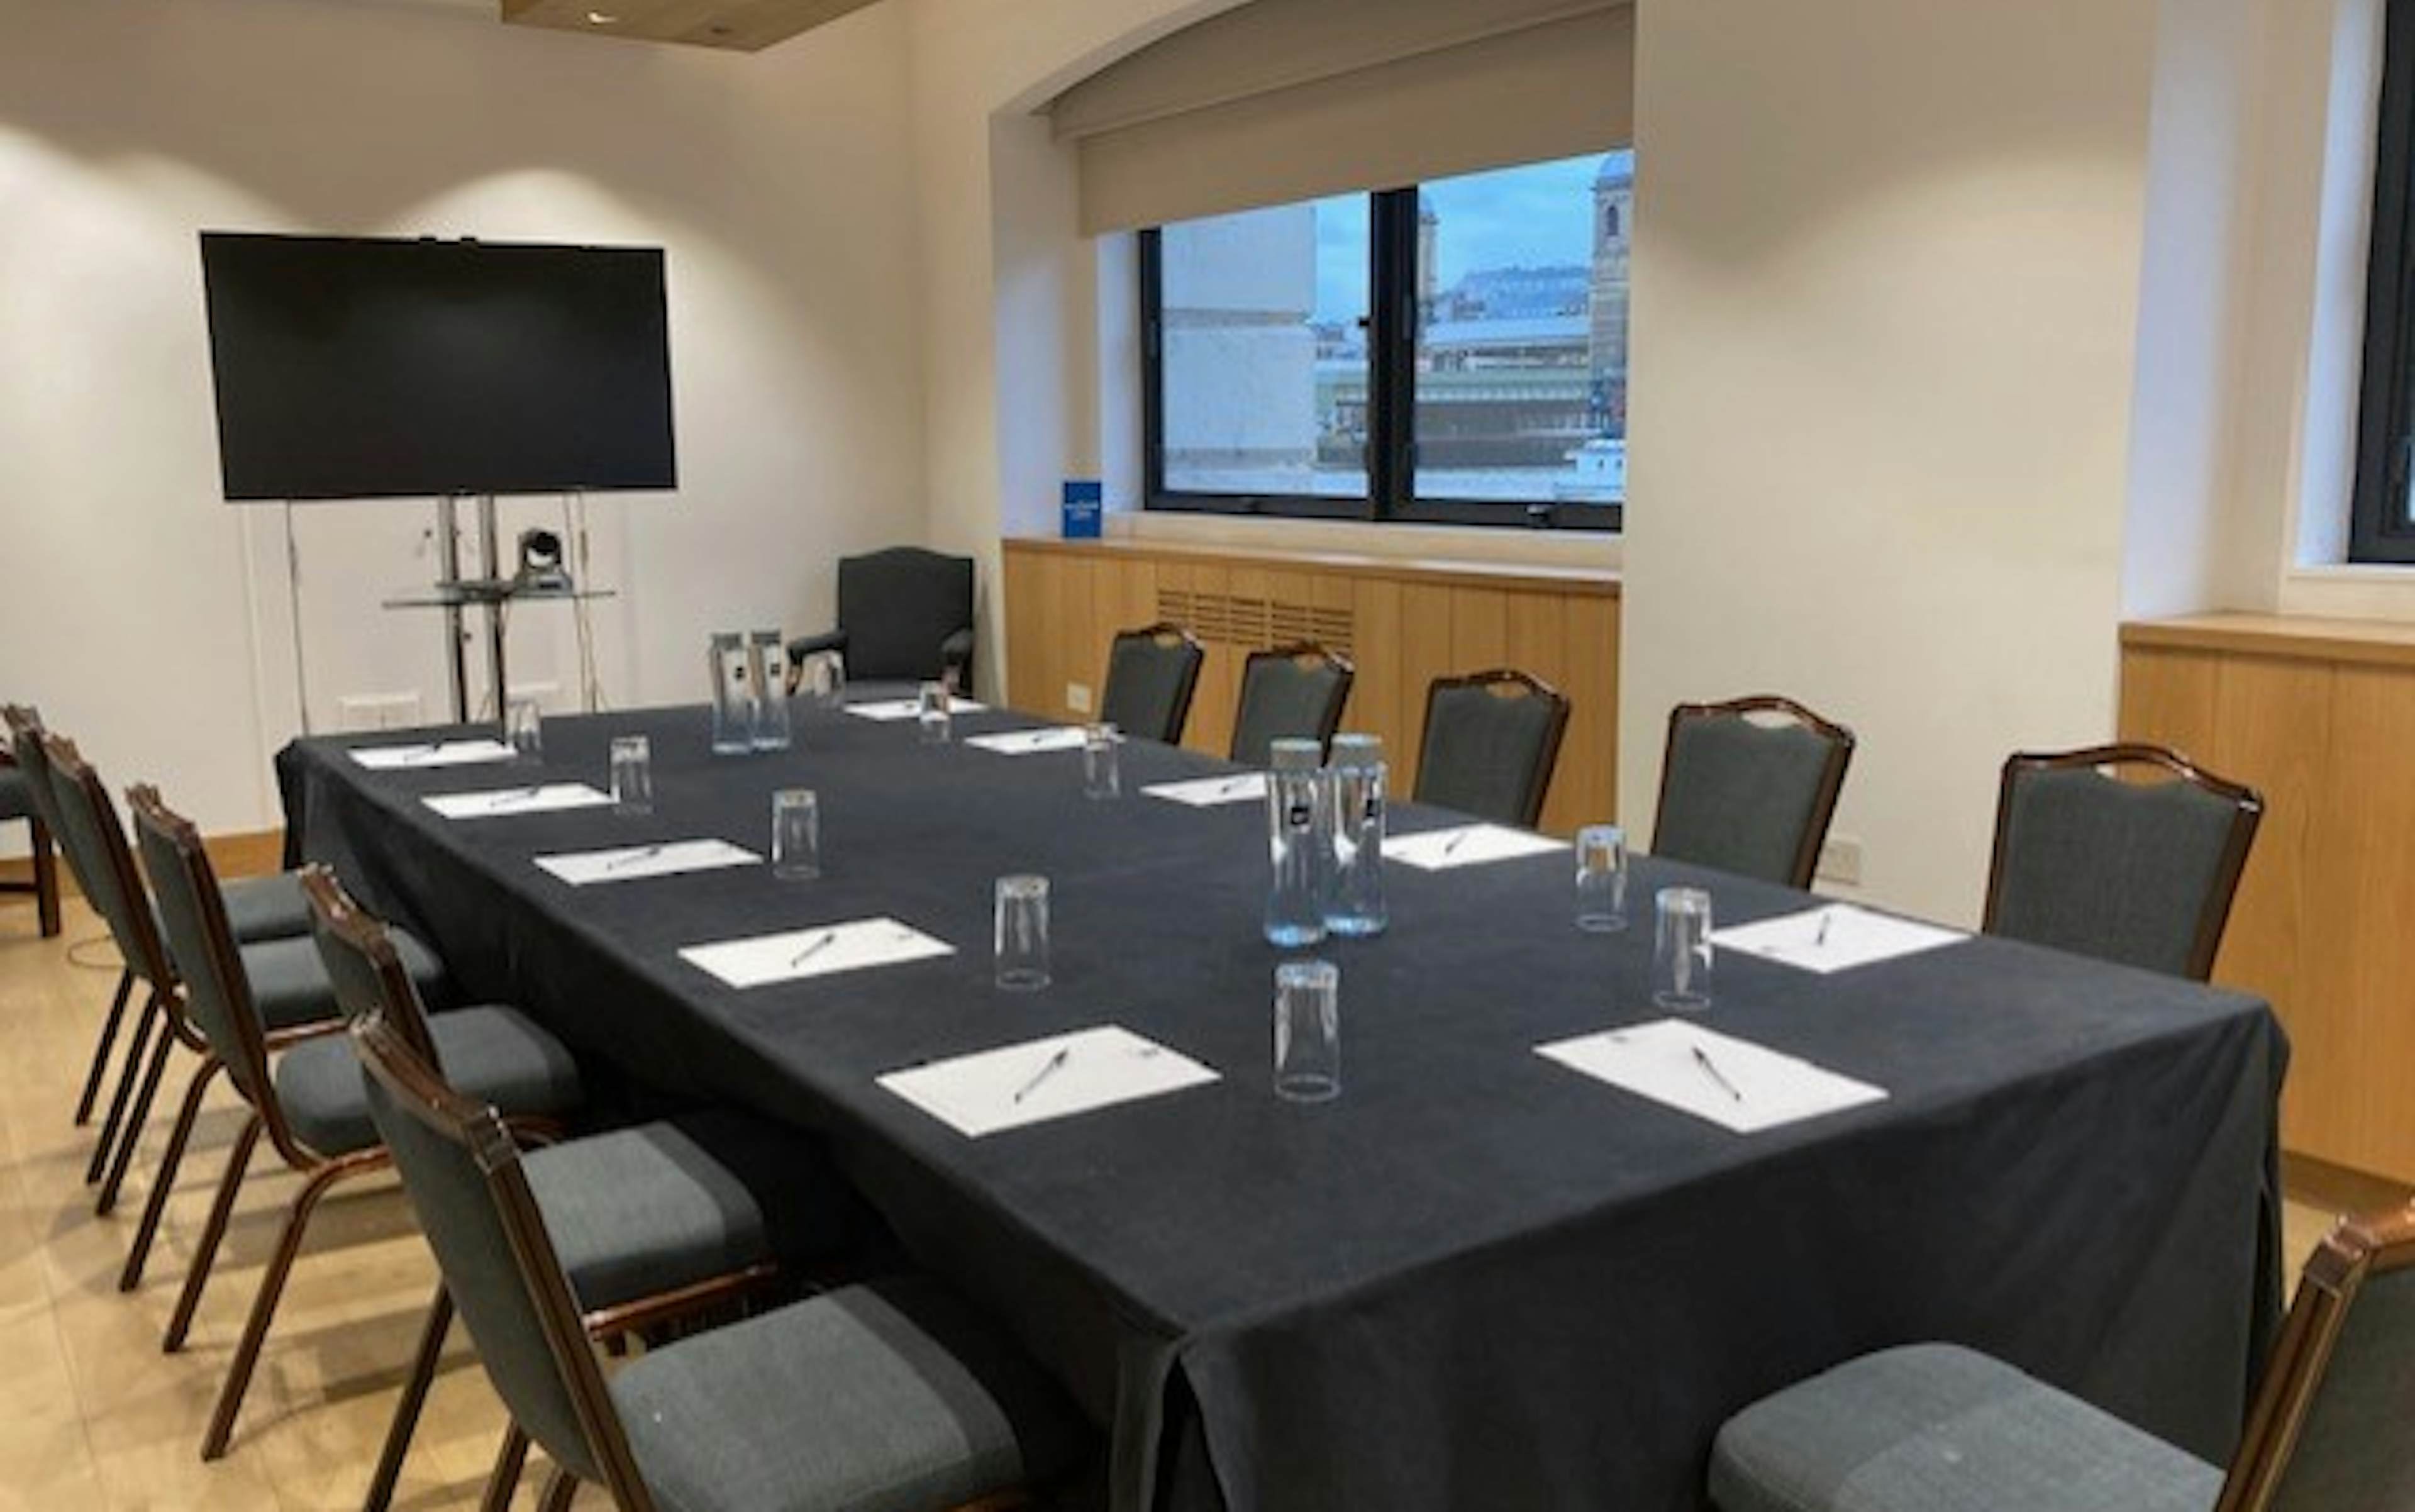 Glaziers Hall - The Thames Room image 1